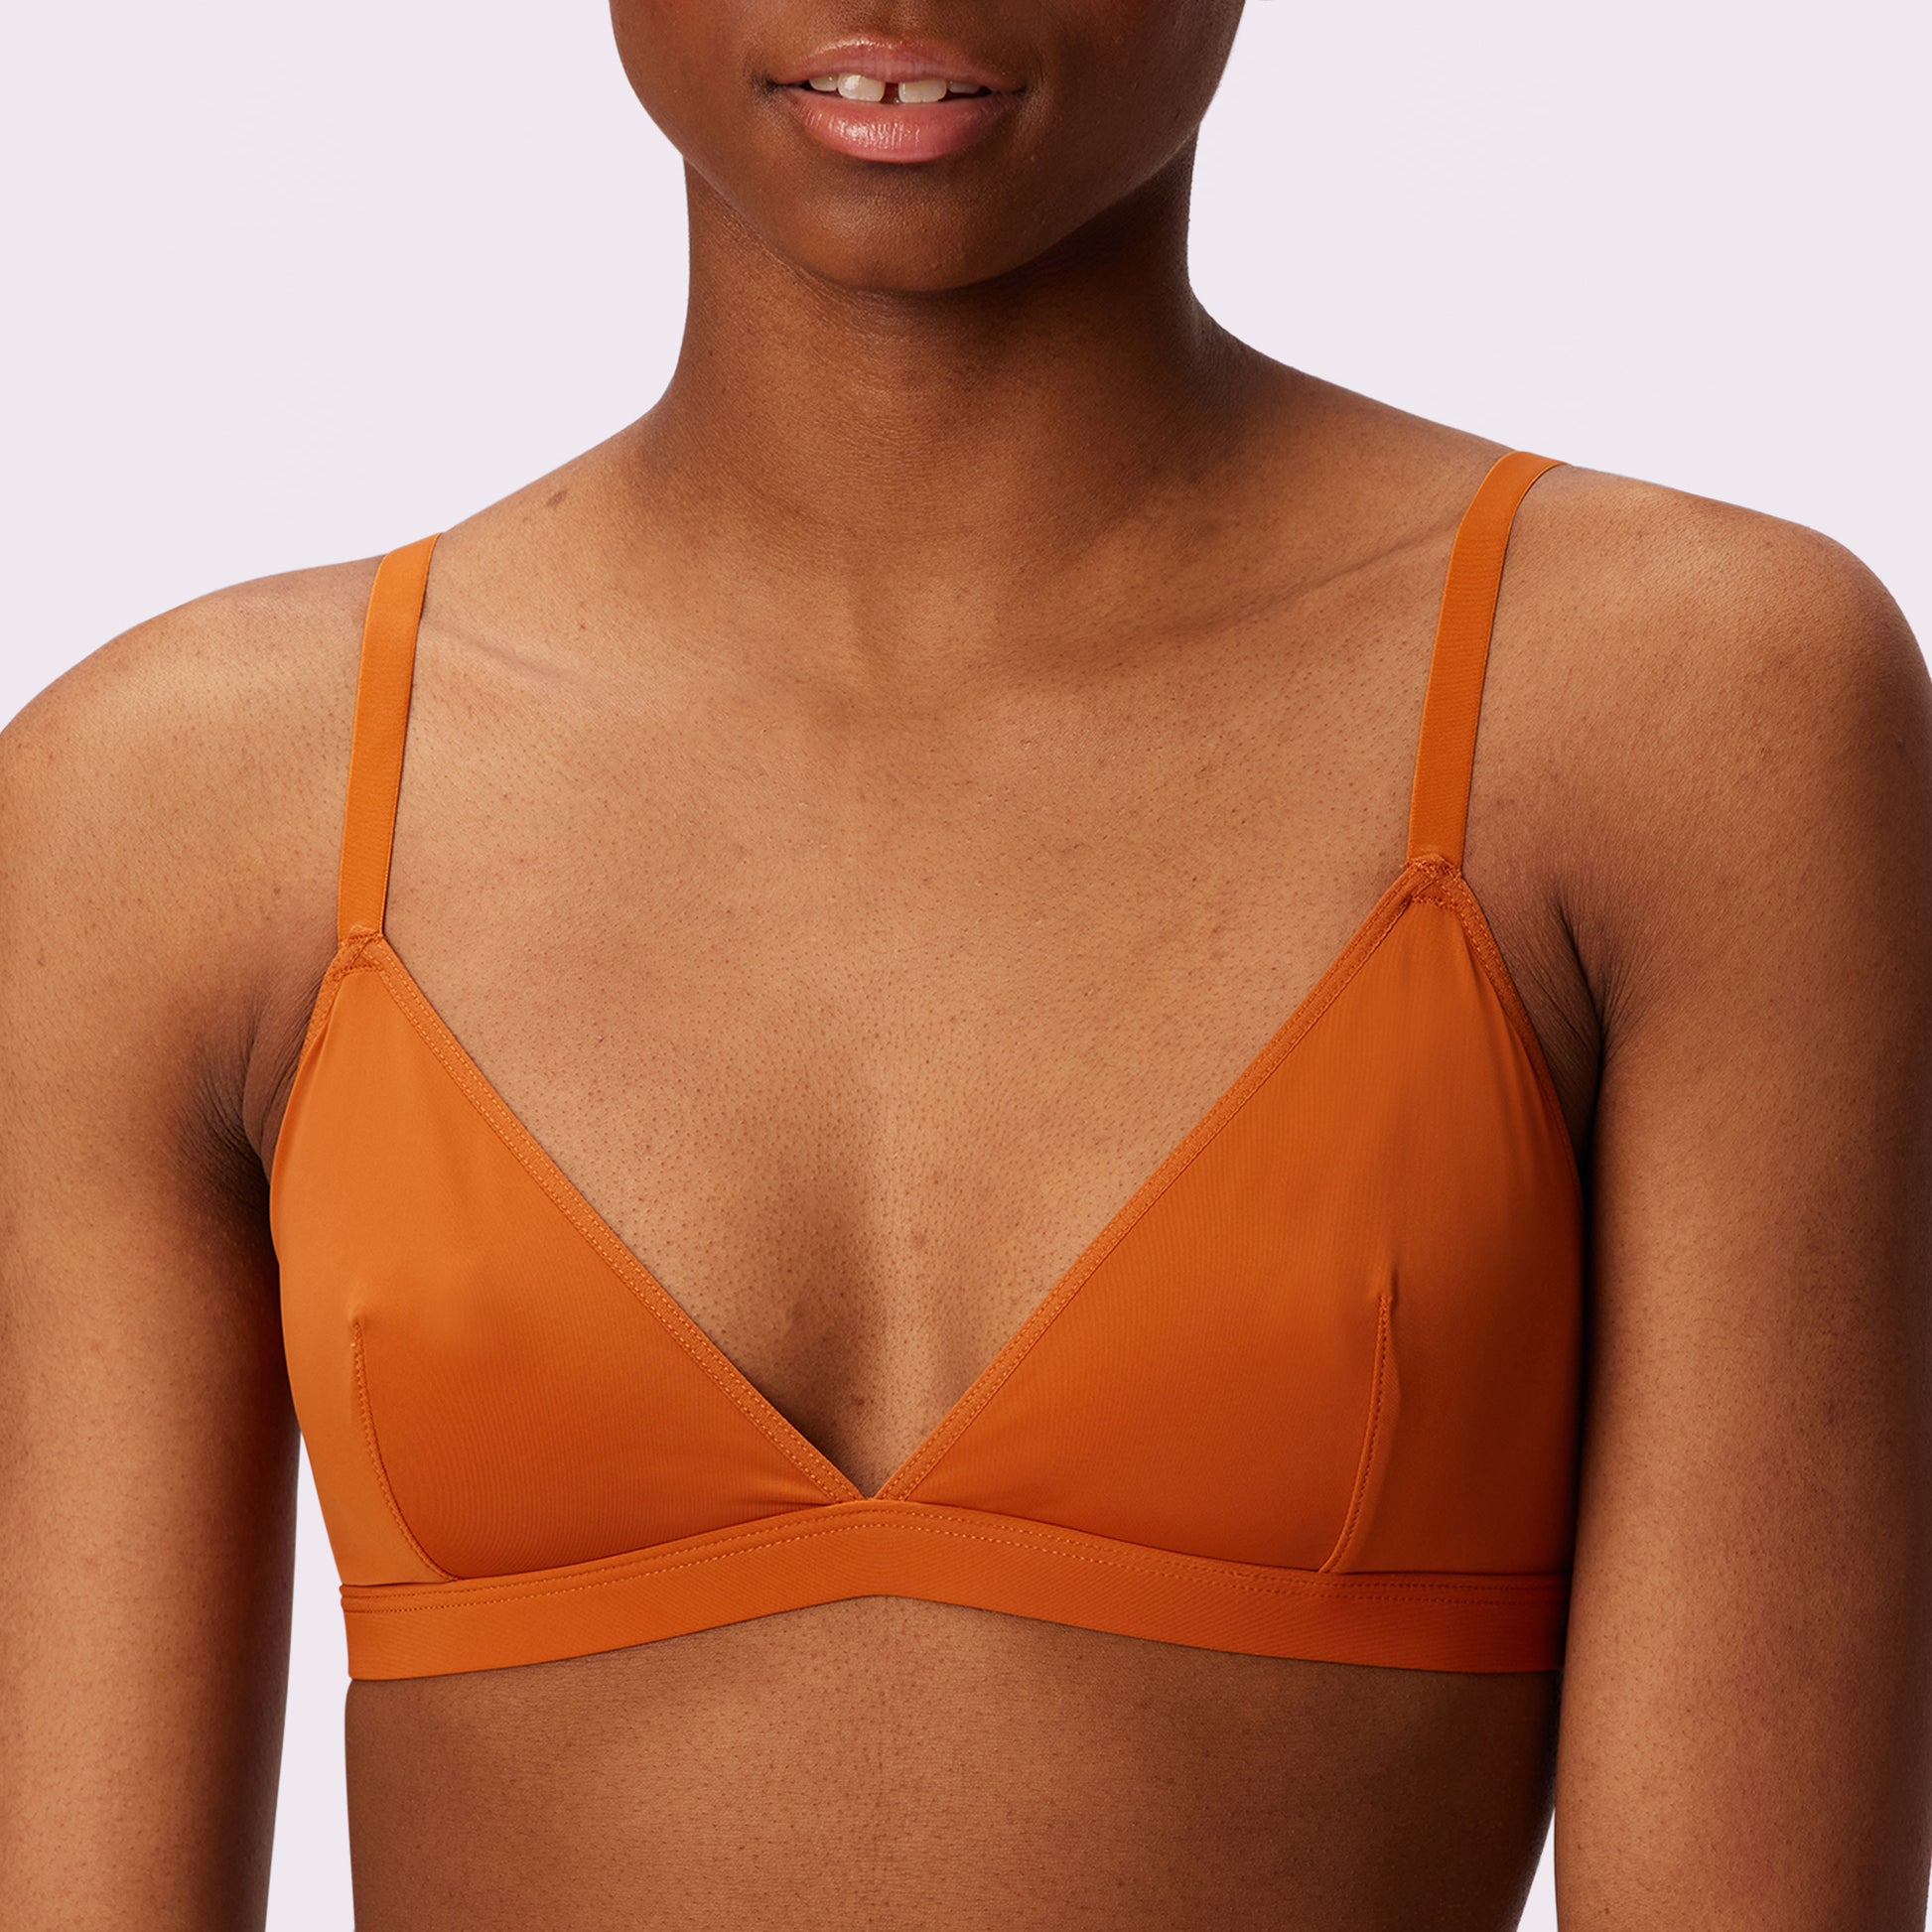 Parade Women's Re:play Triangle Wireless Bralette - Sour Cherry Xs : Target